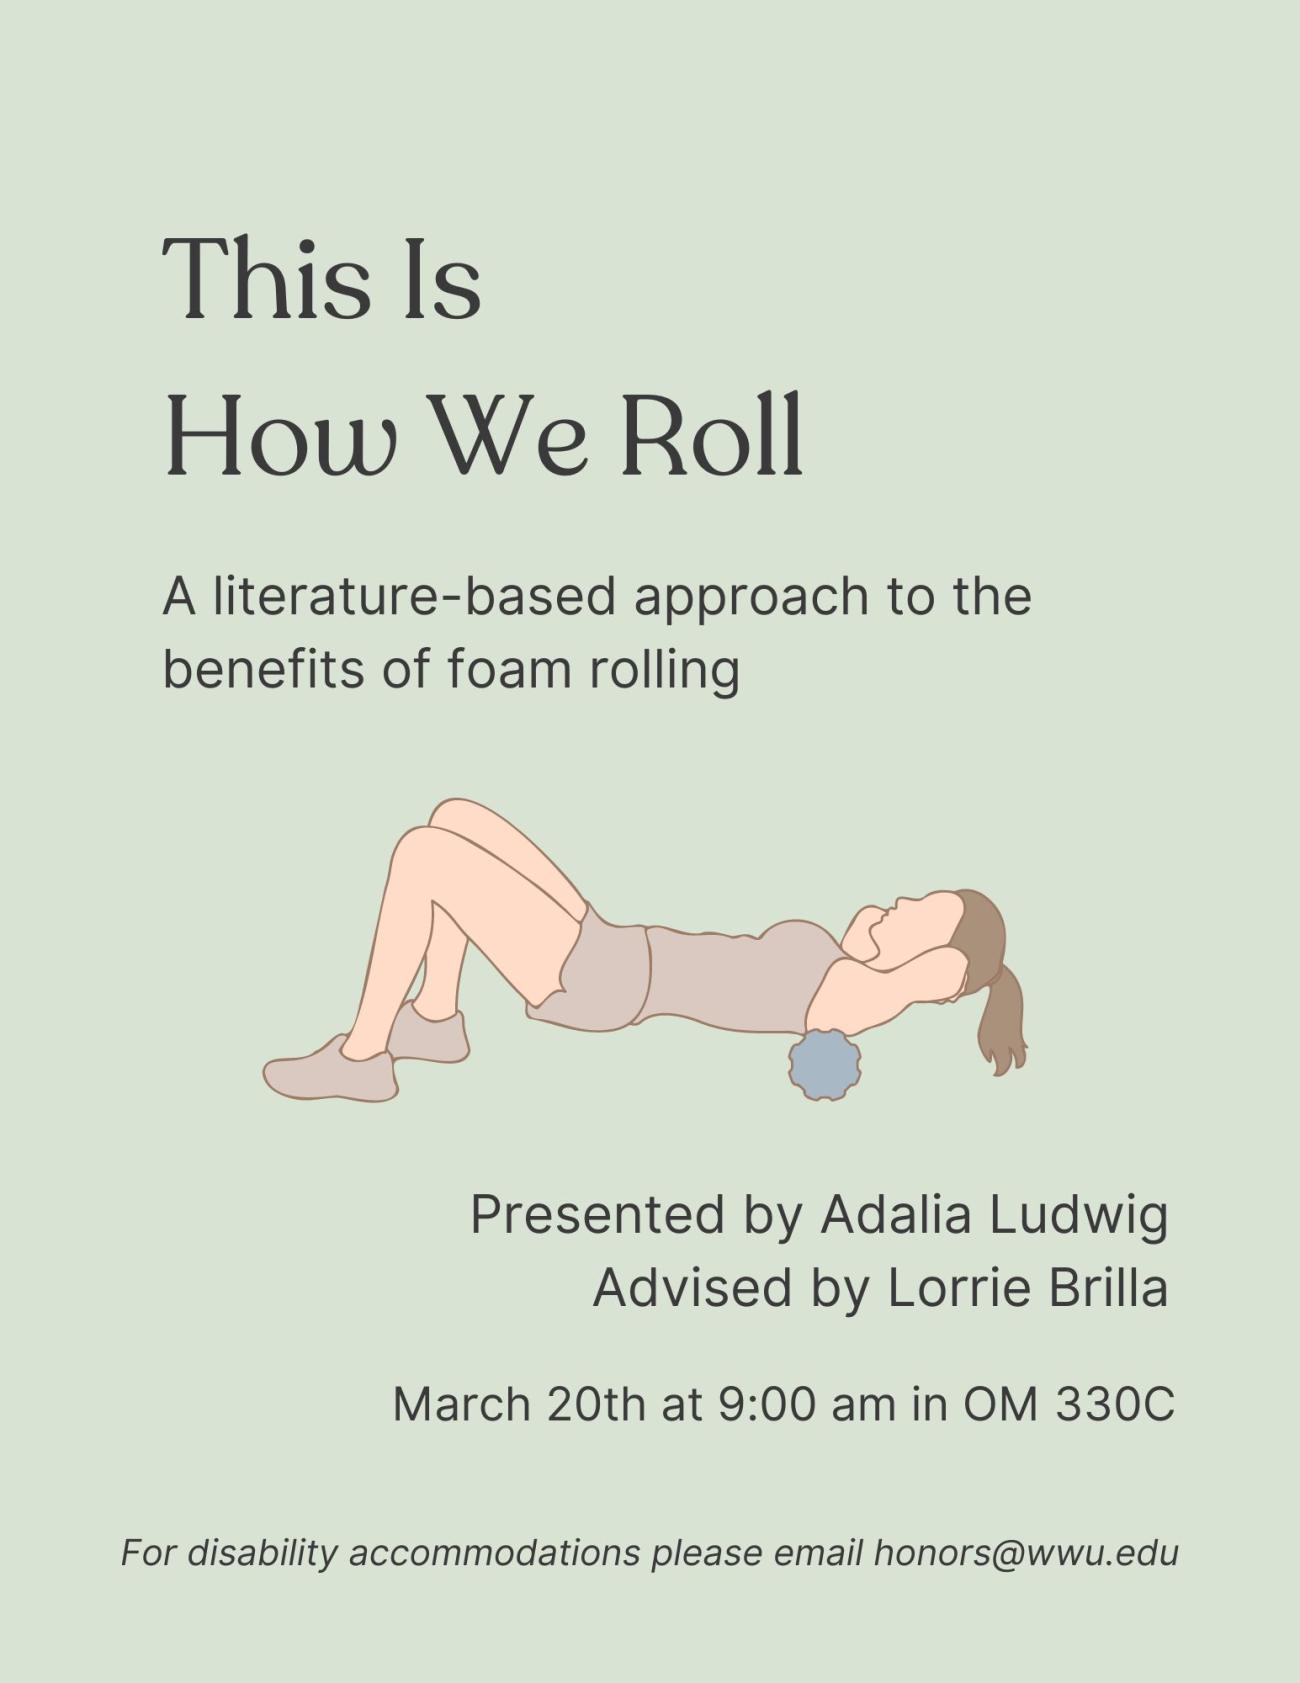 A light green background with a drawing of a person lying face up and using a foam roller on their upper back. Text reads, "This Is How We Roll: A literature-based approach to the benefits of foam rolling. Presented by Adalia Ludwig, Advised by Lorrie Brilla. March 20th at 9:00 am in OM 330C. For disability accommodations, please email honors@wwu.edu".